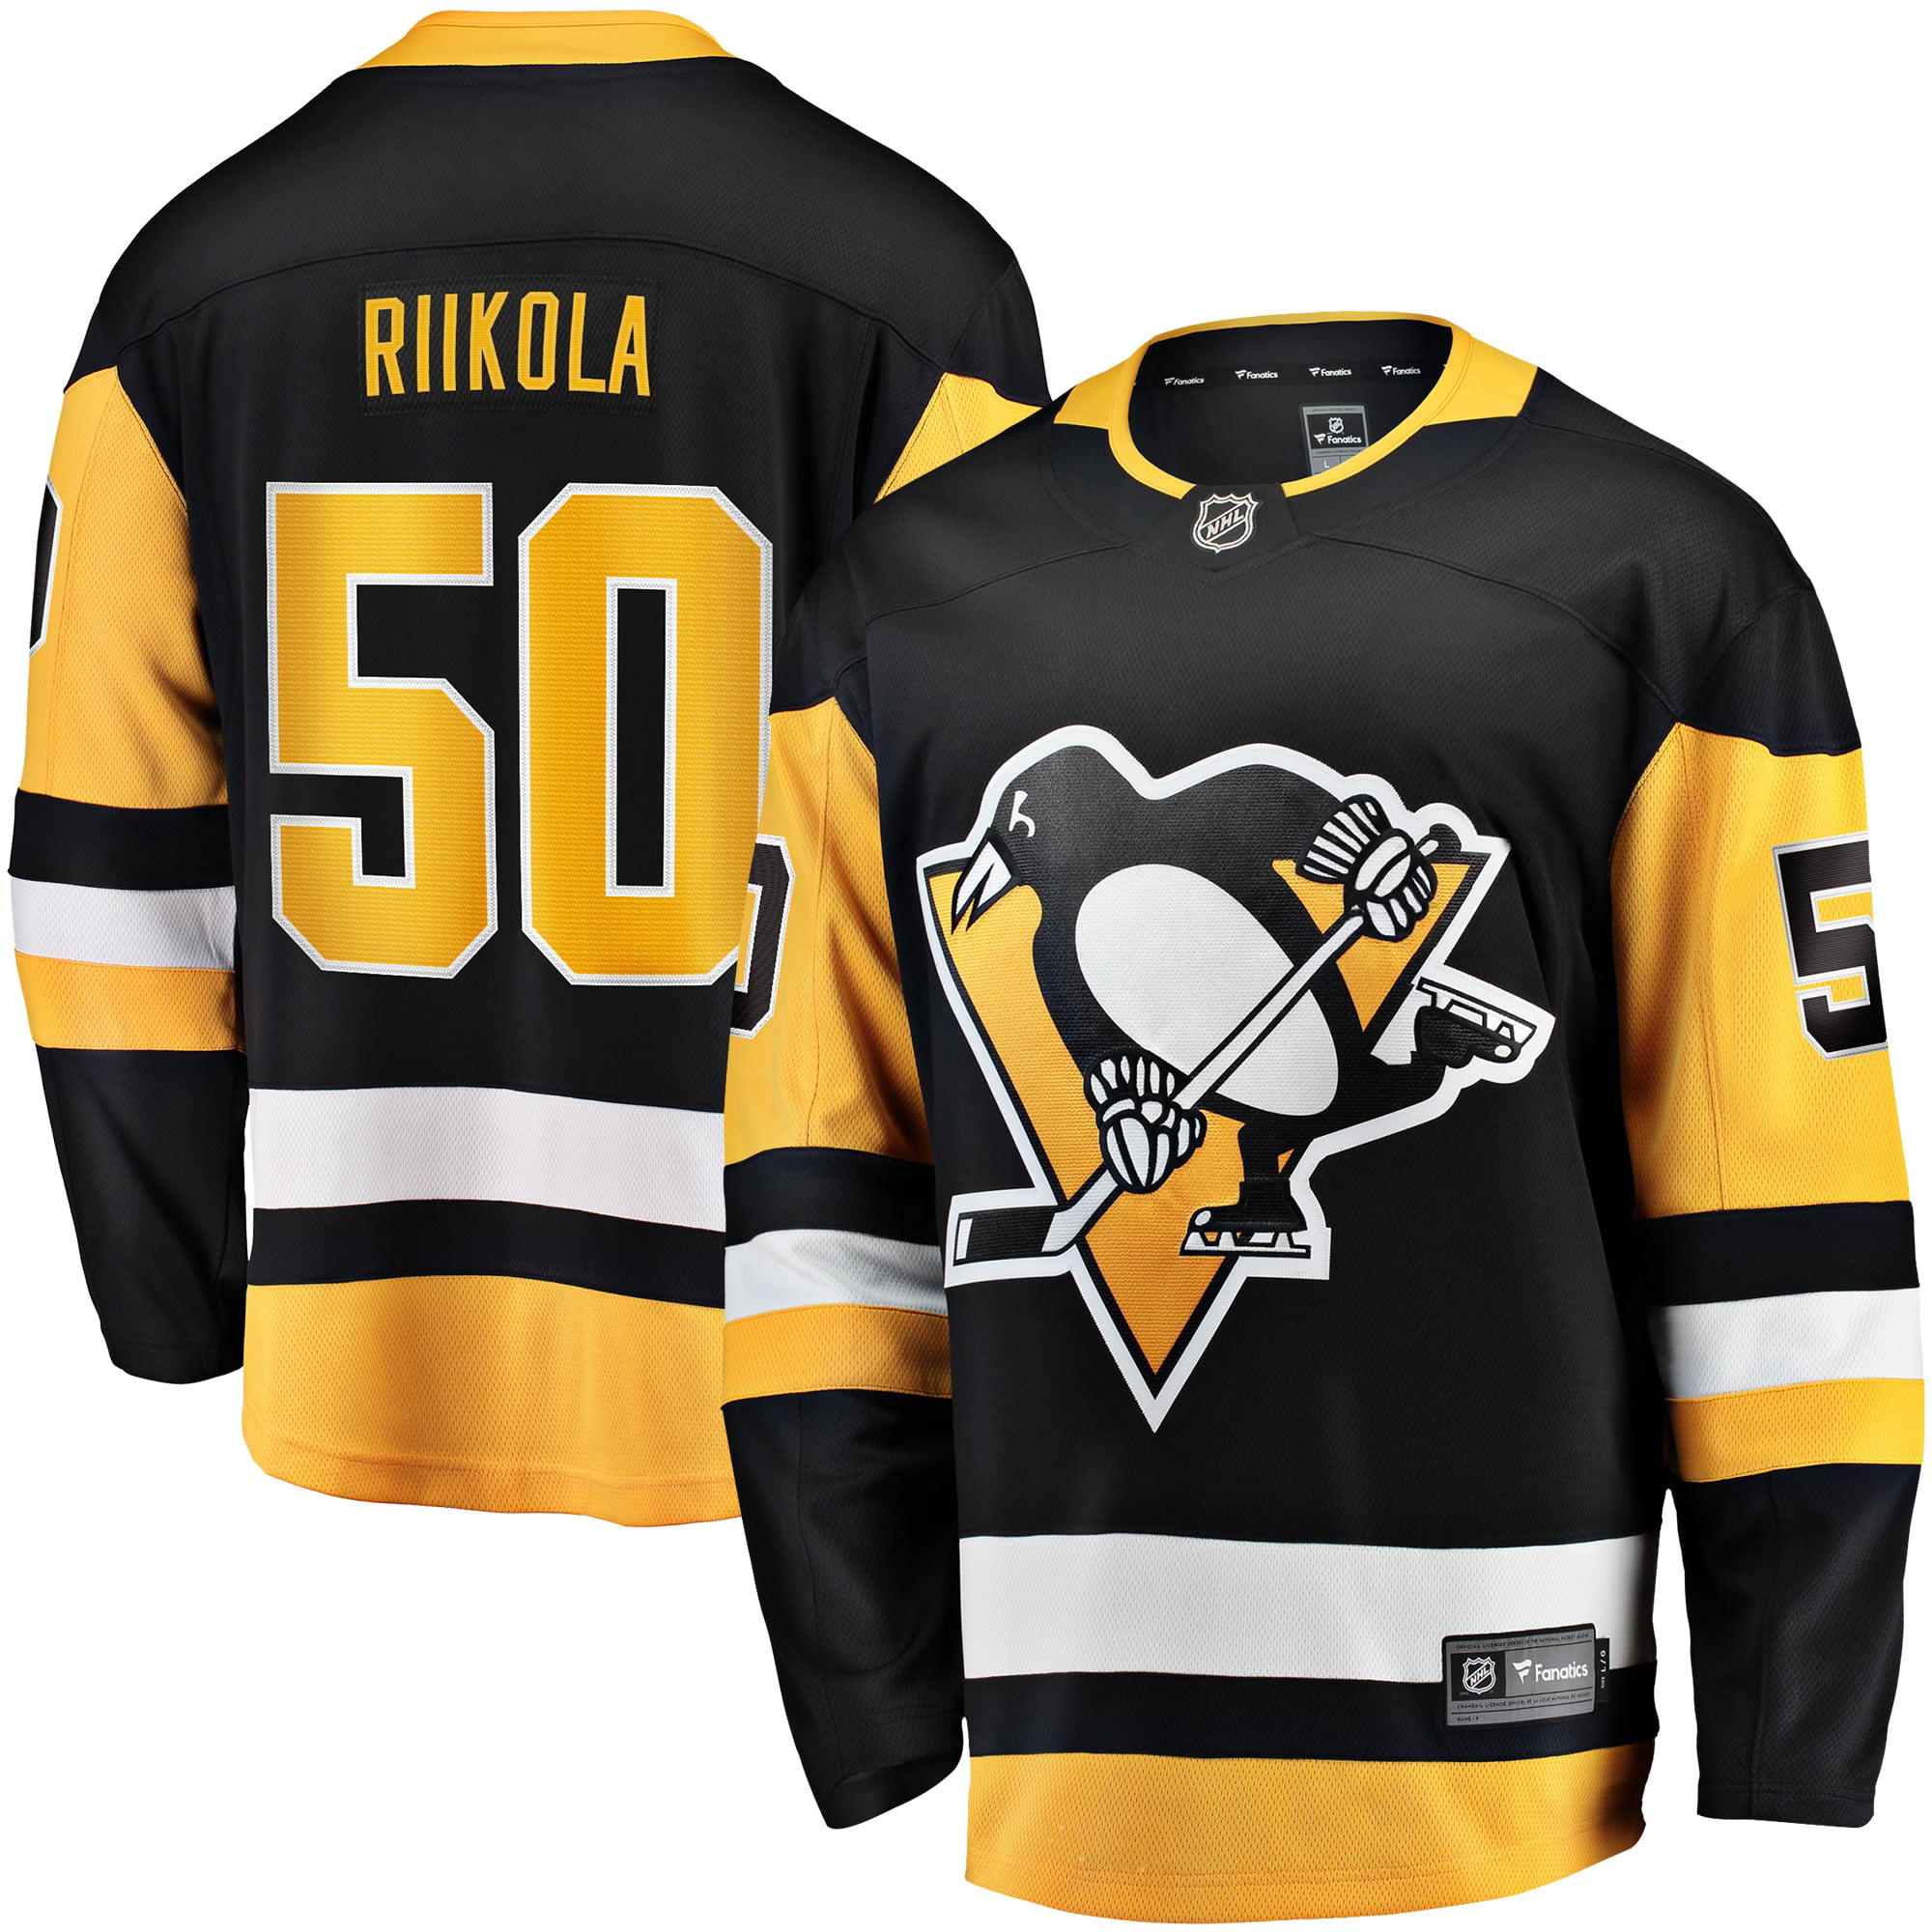 PITTSBURGH PENGUINS White Gold NEW Reebok Pro Light Weight Practice Jersey Large